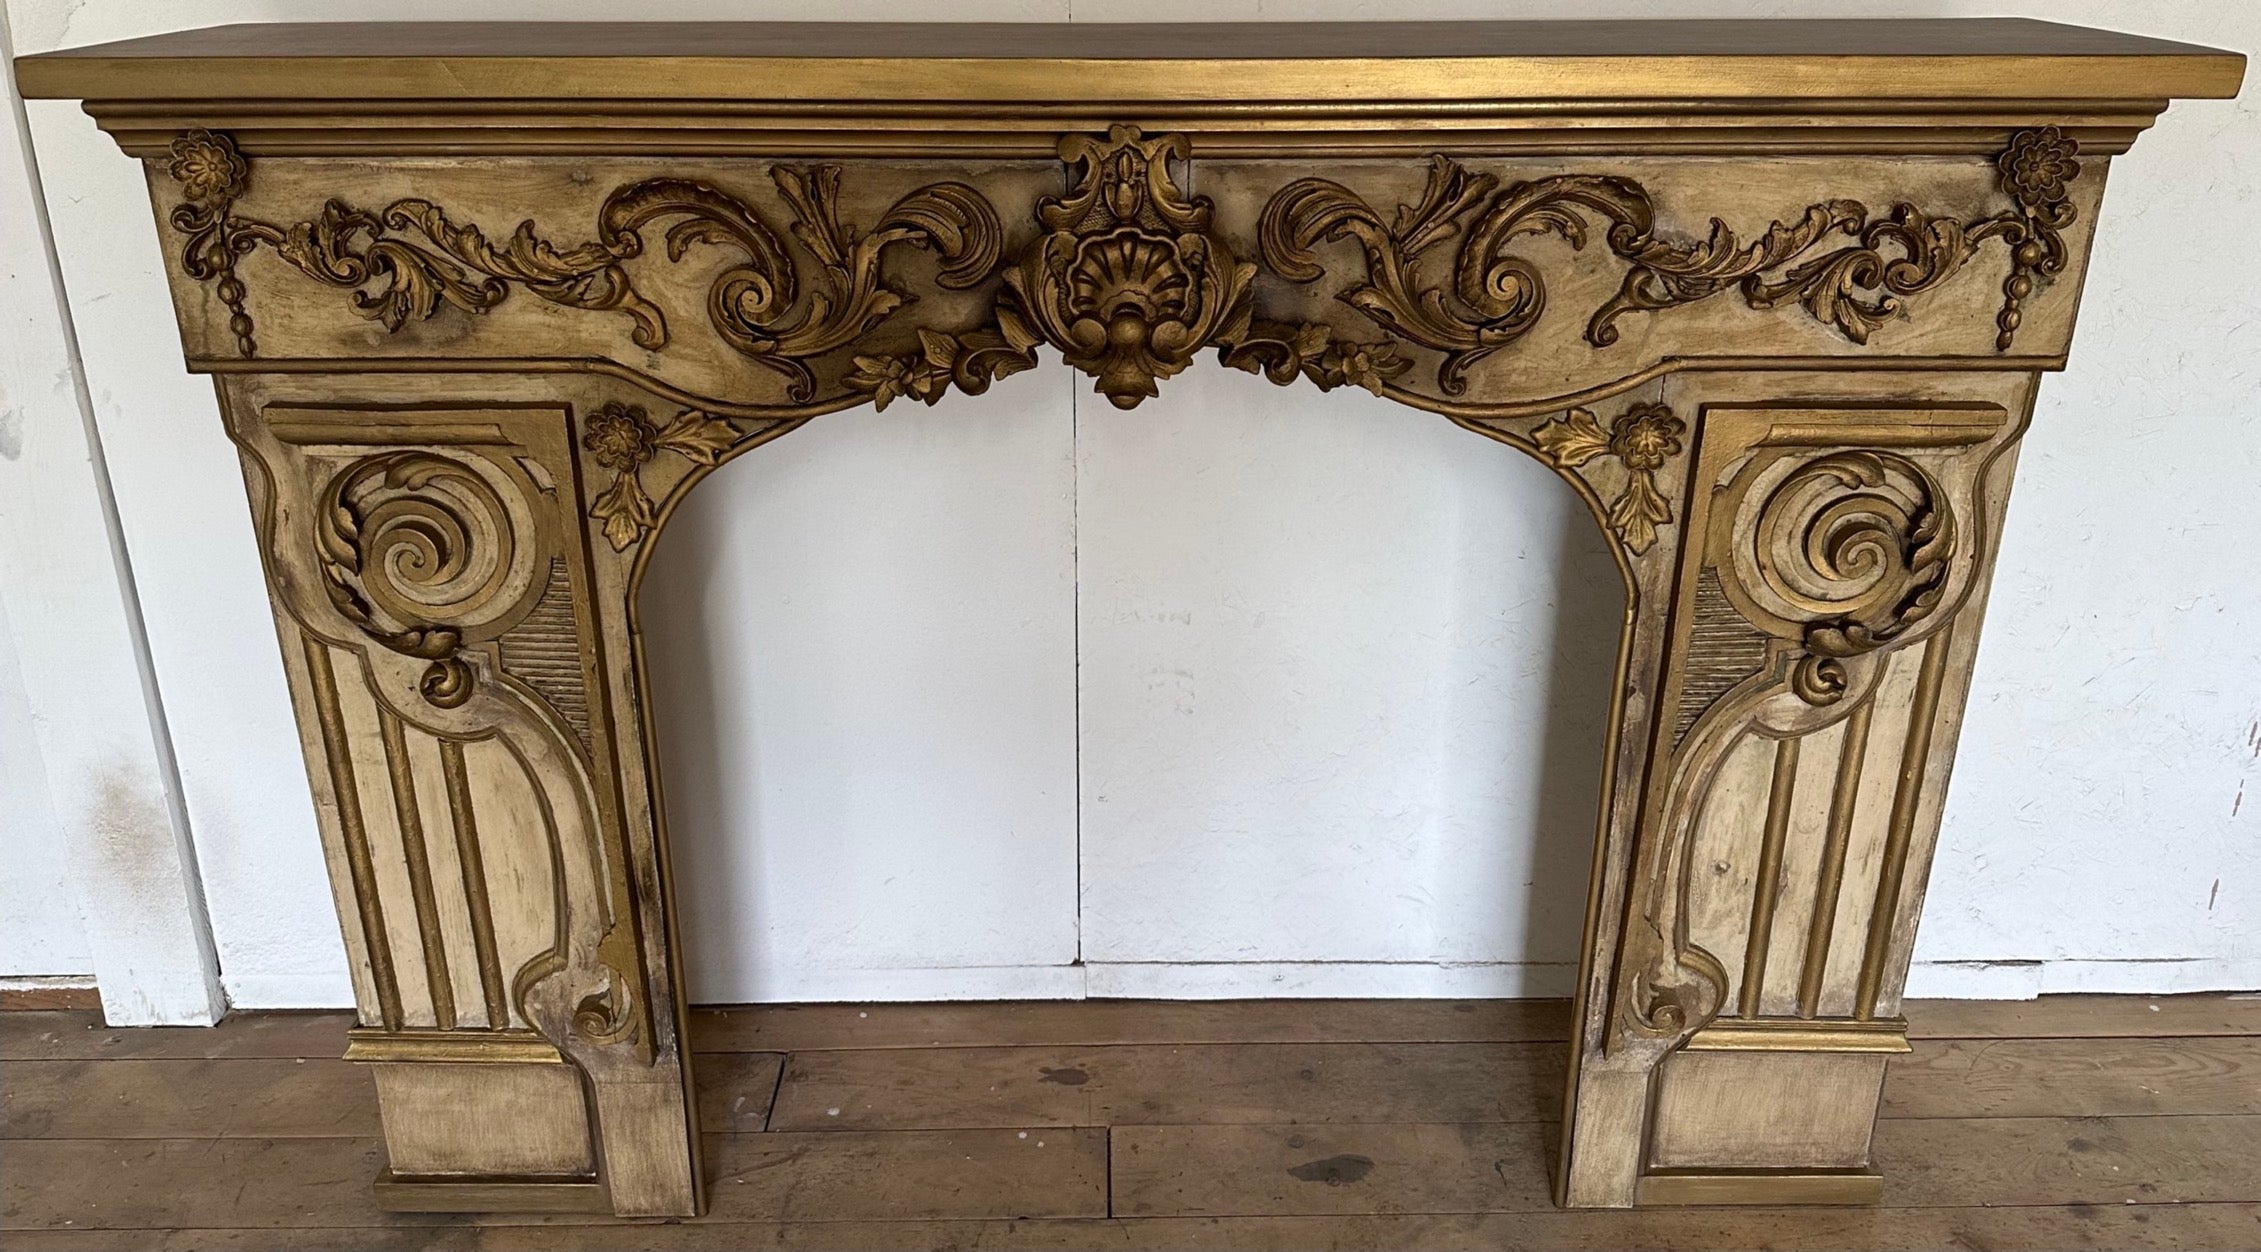 A rare decorative gilt-wood hand carved painted Baroque style 19th century French fireplace mantel -- finely carved detailed shell, foliage, scrolled swags, supported on wide plinths. The spandrels with conforming, flowing swags, All beneath a gold